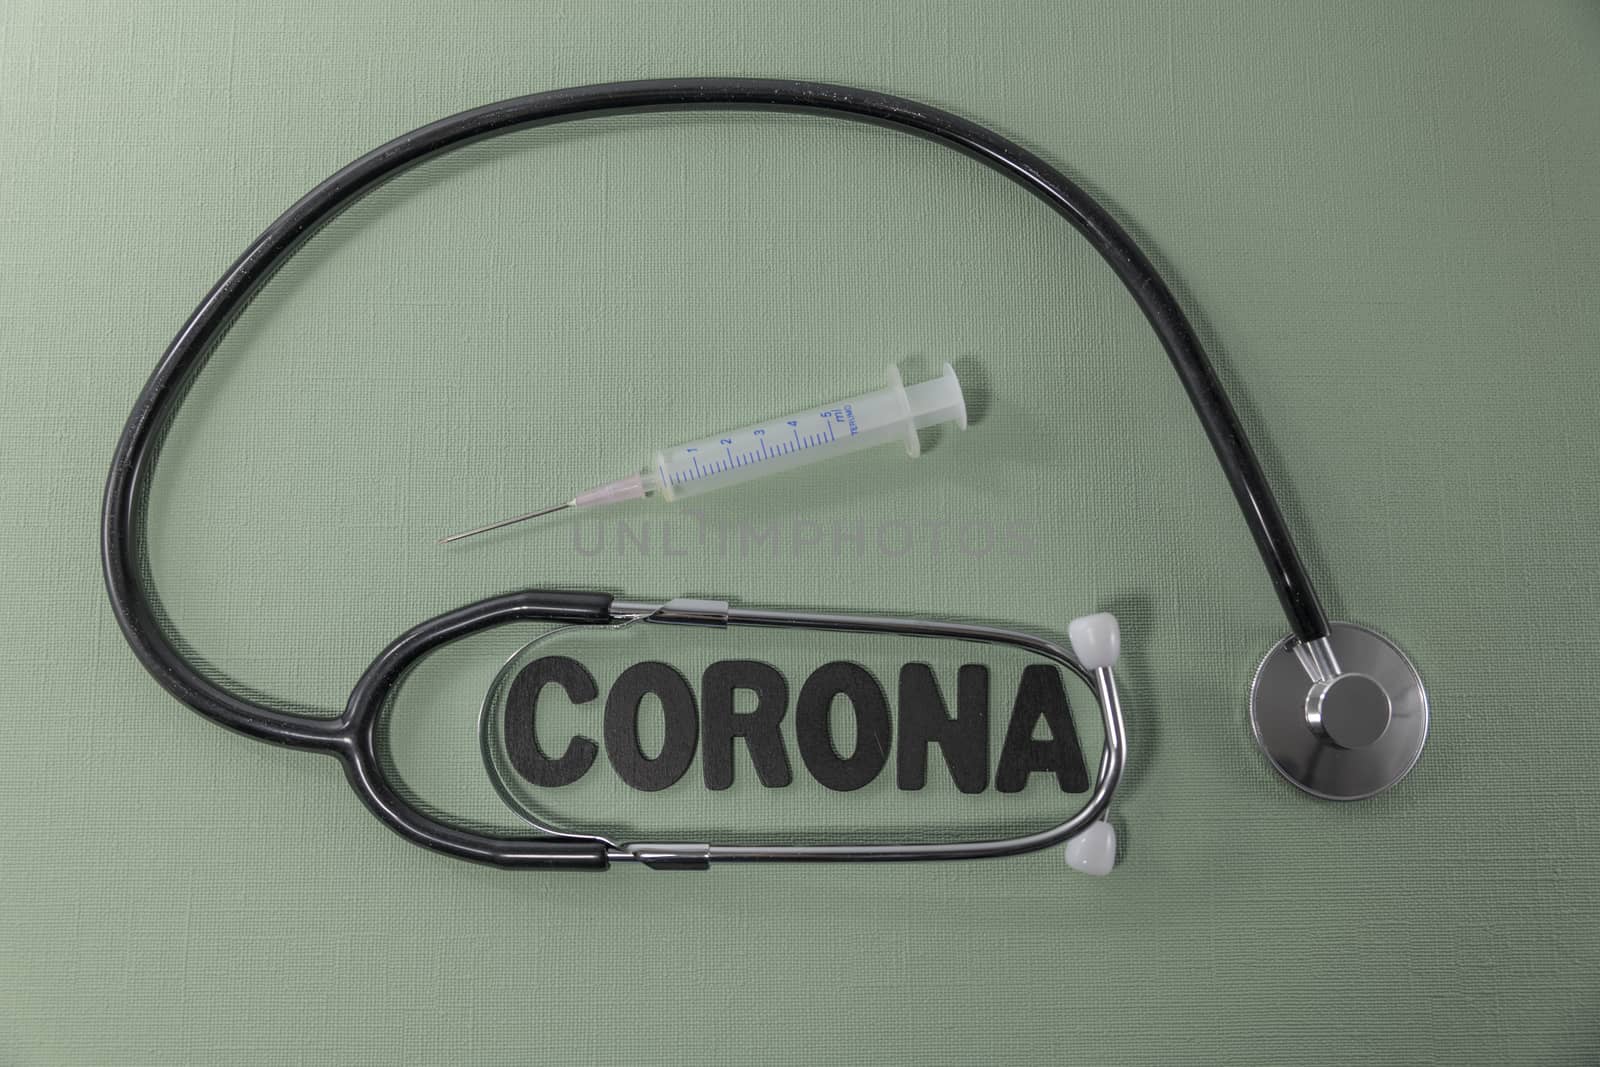 Covid 19 virus conceptual image with text in black and green and stethoscope